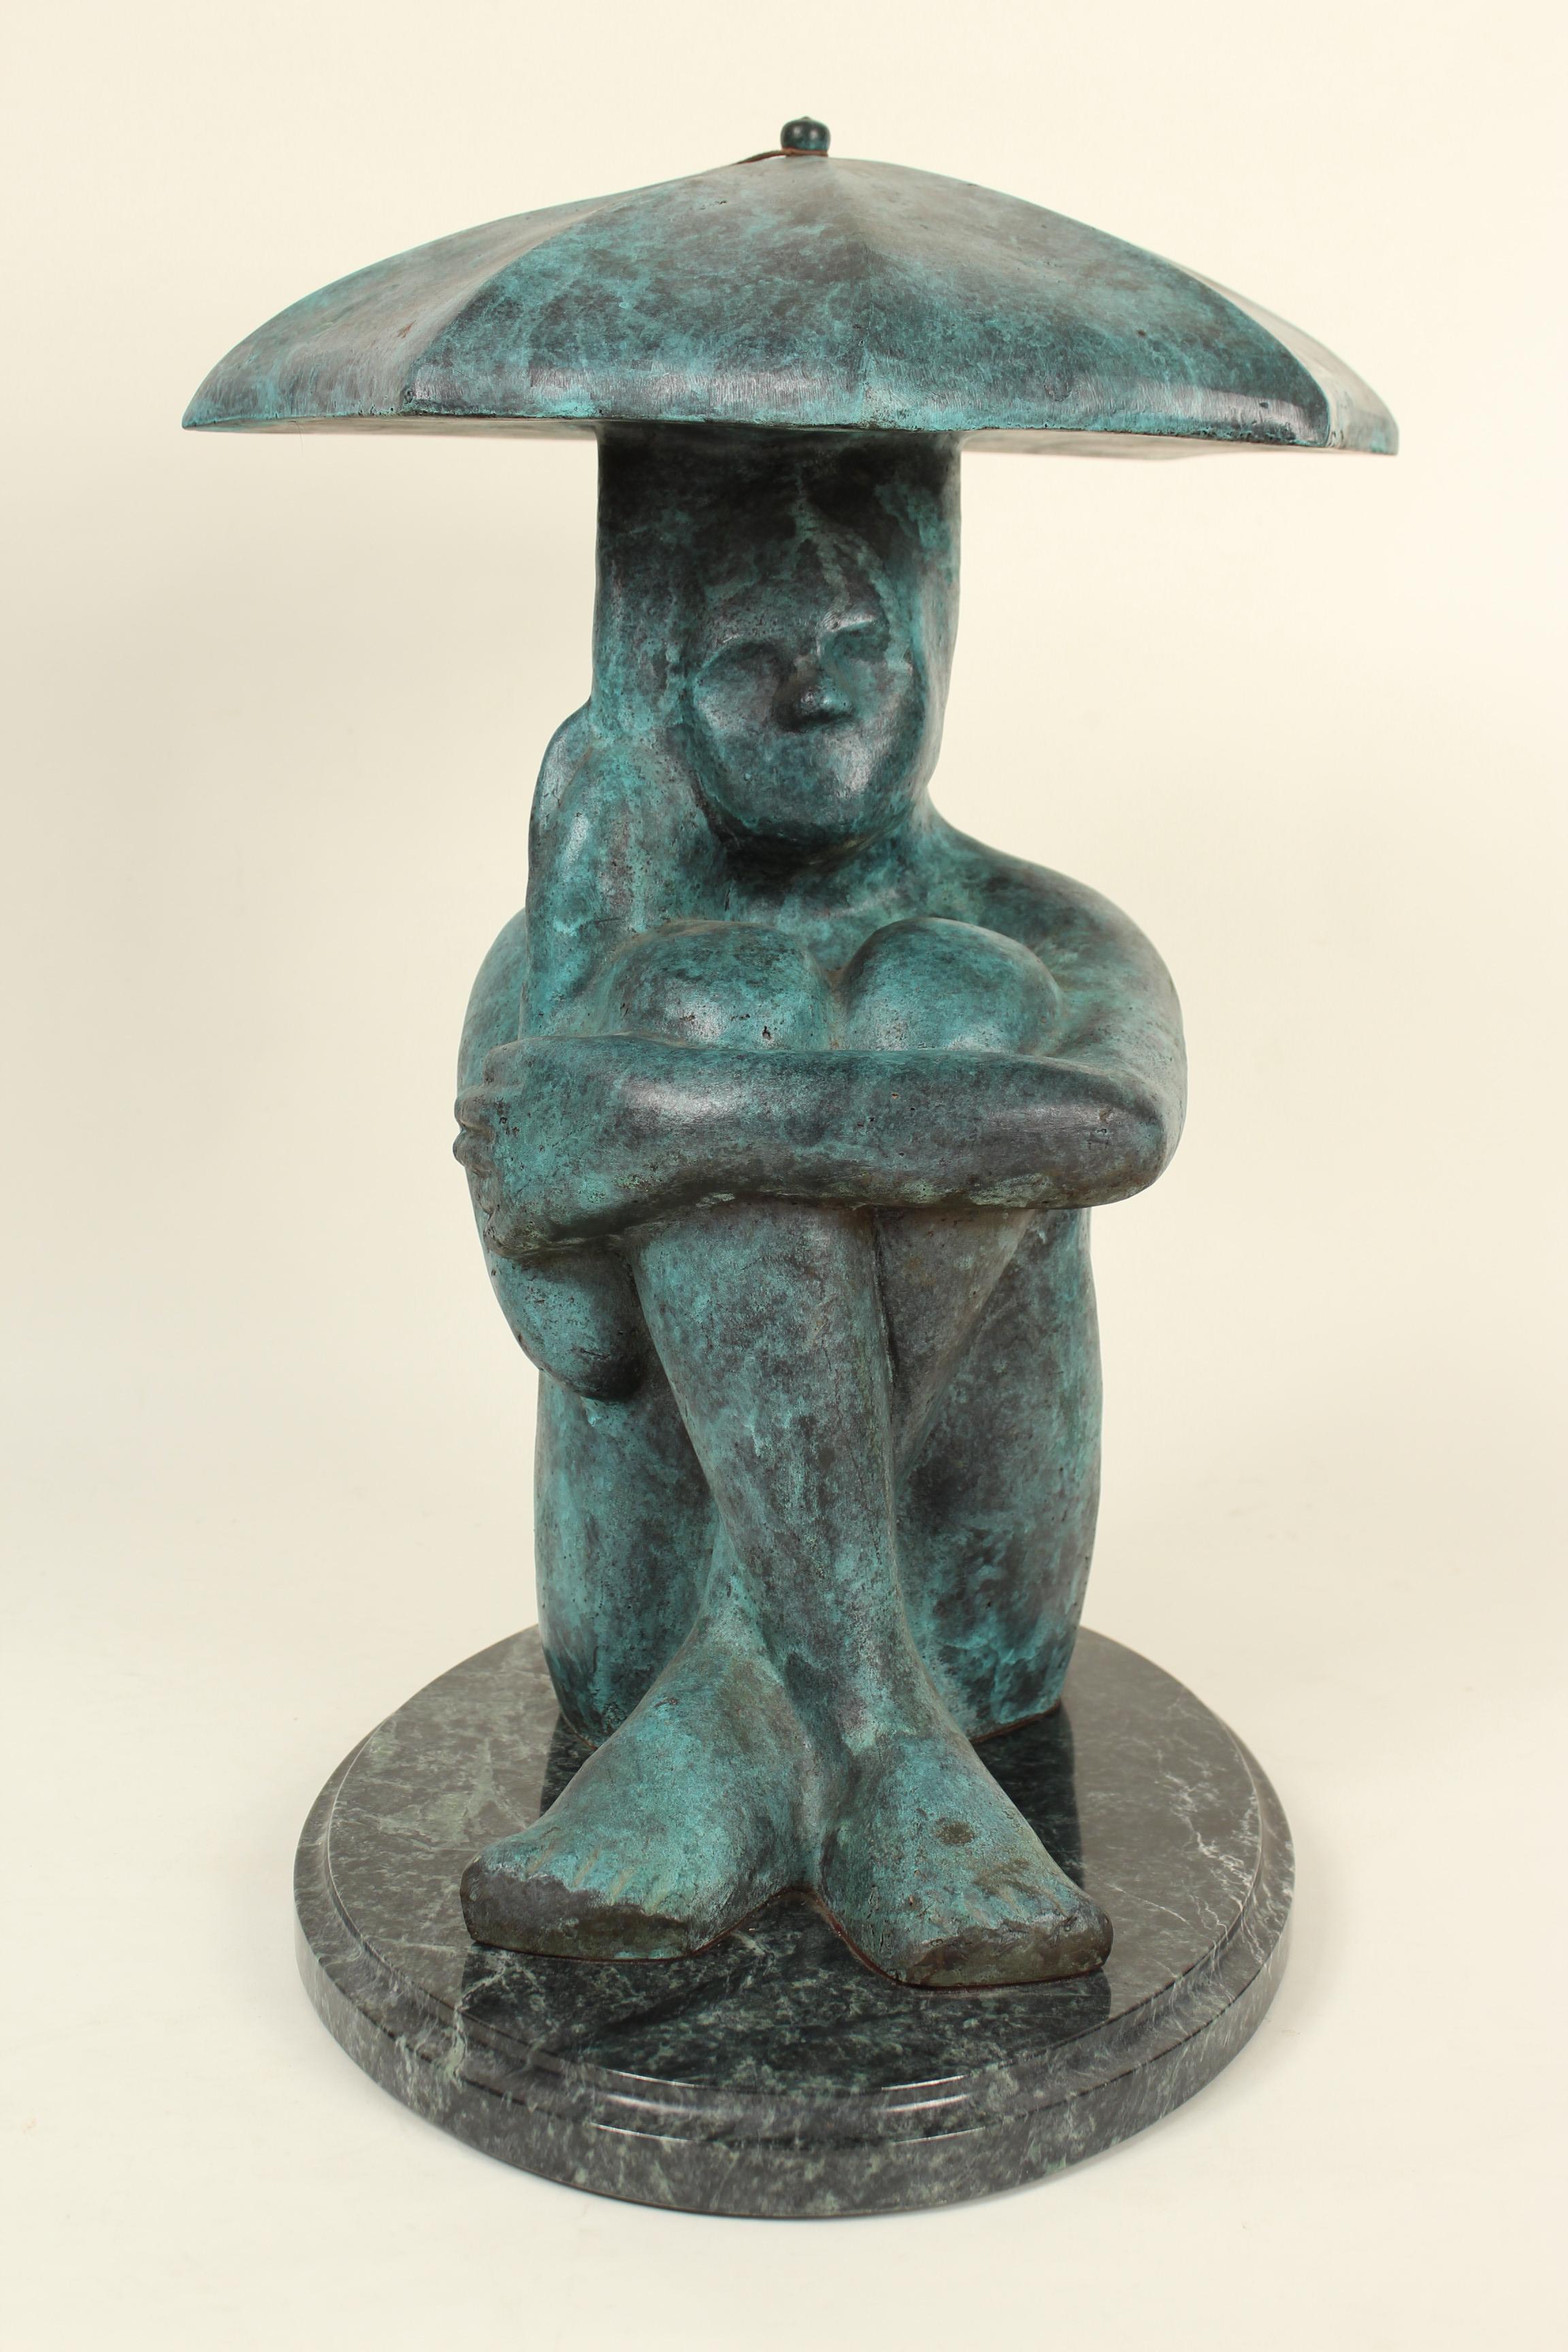 Contemporary figurative bronze sculpture of a seated person holding a parasol resting on a marble base, by Mexican artist Victor Salmones (1937-1989).